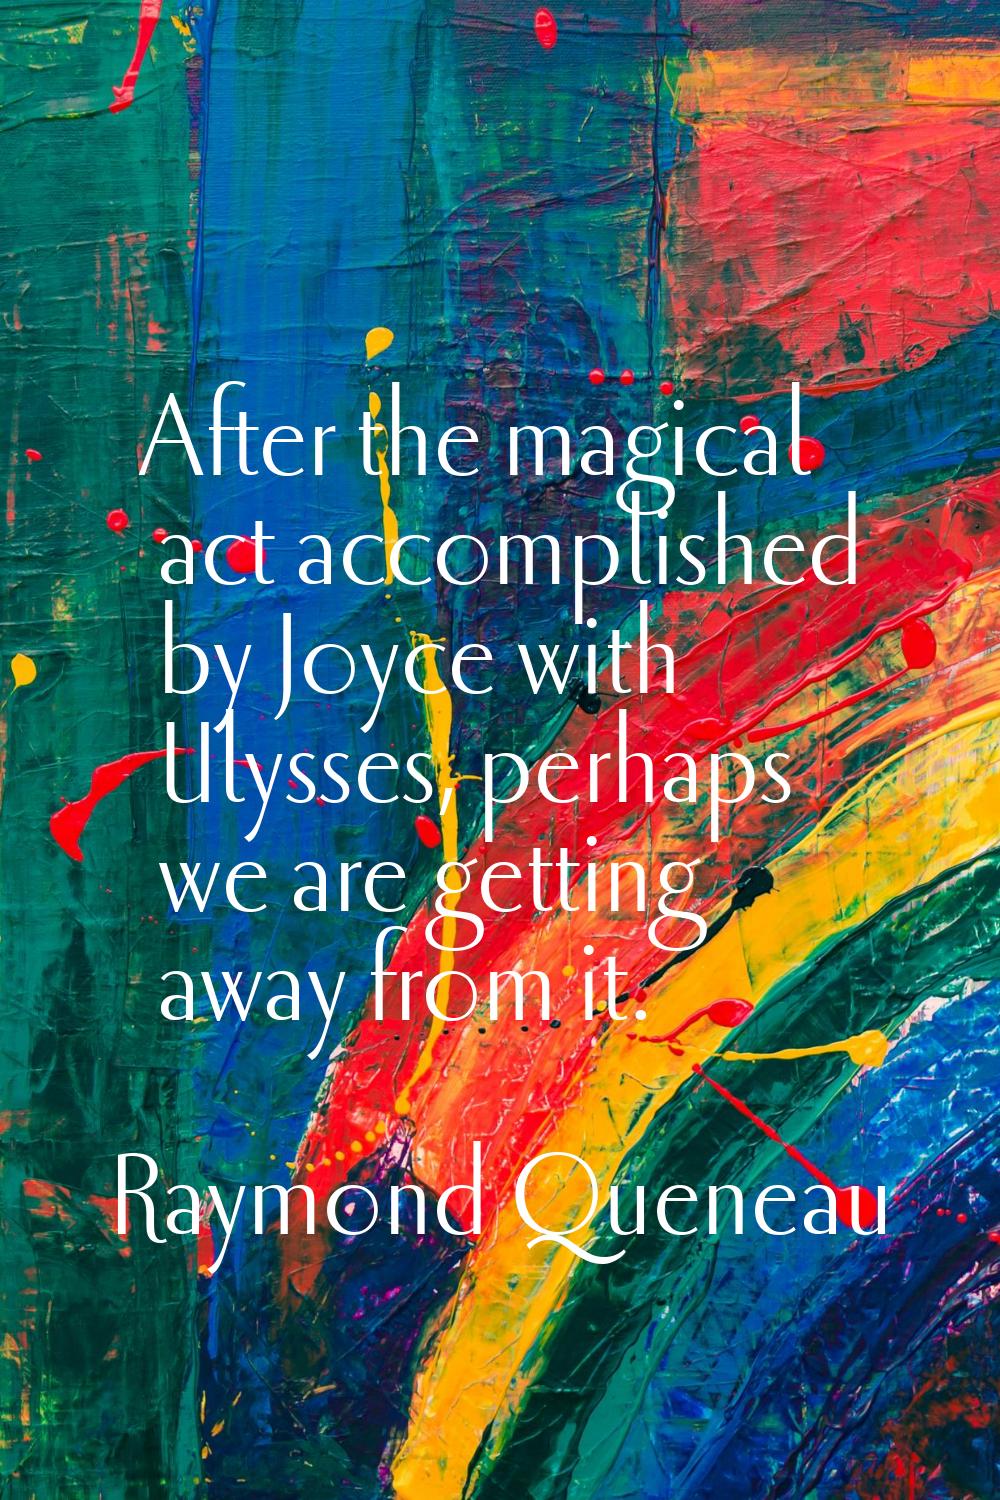 After the magical act accomplished by Joyce with Ulysses, perhaps we are getting away from it.